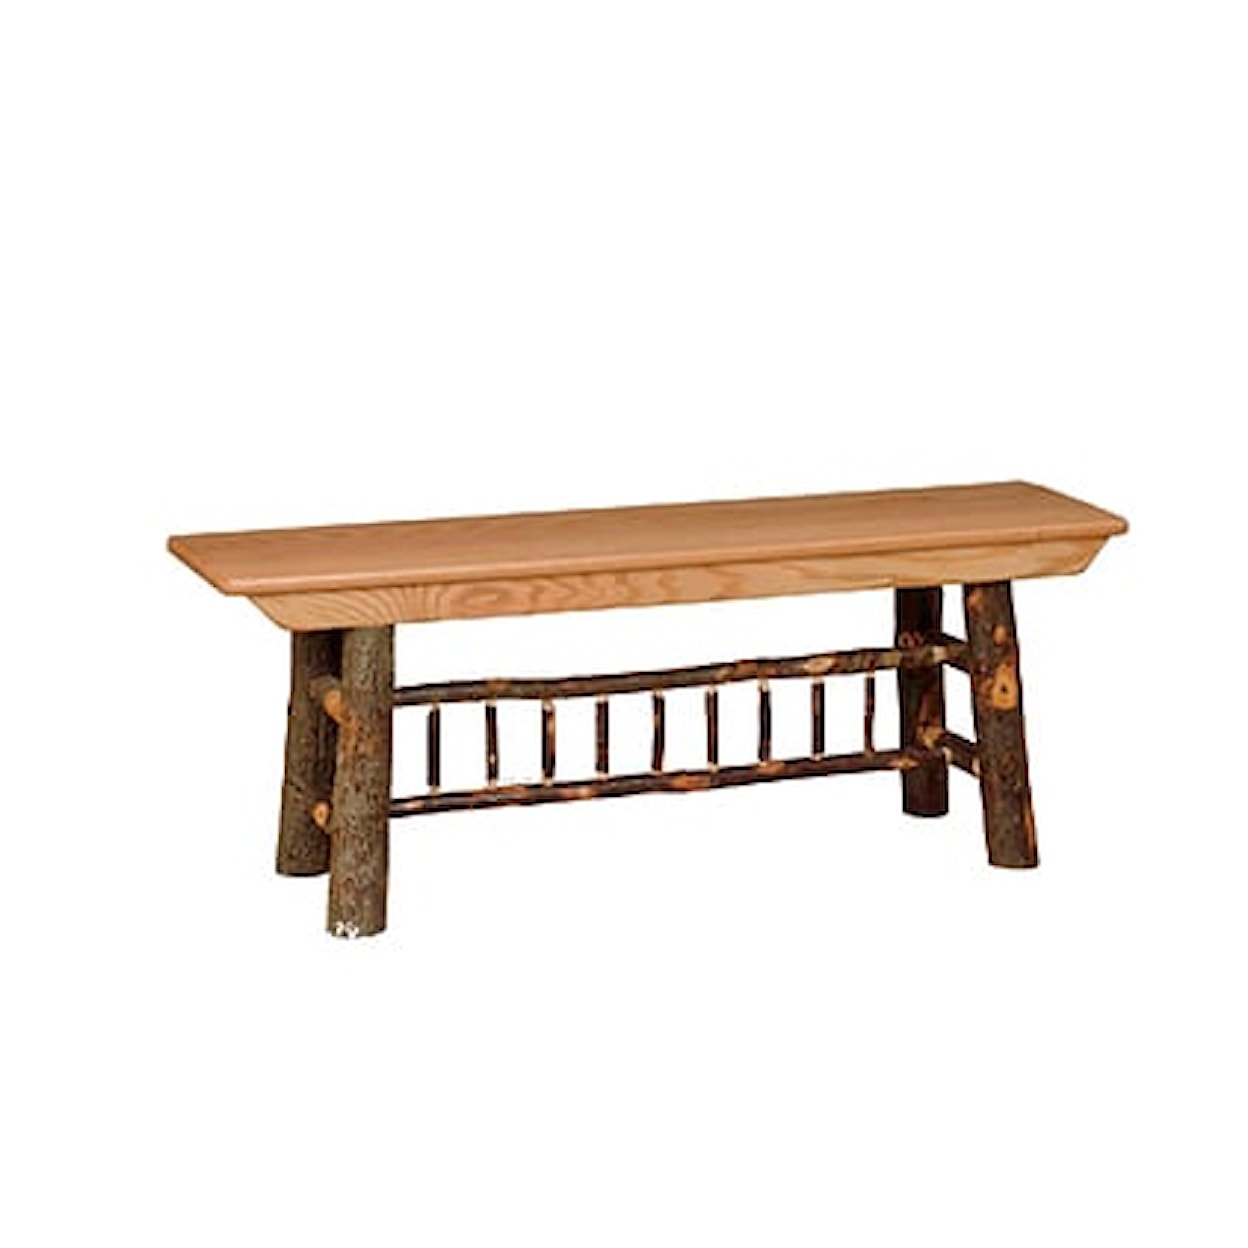 Byler's Rustic Furniture Hickory Collection 4' Farm Bench